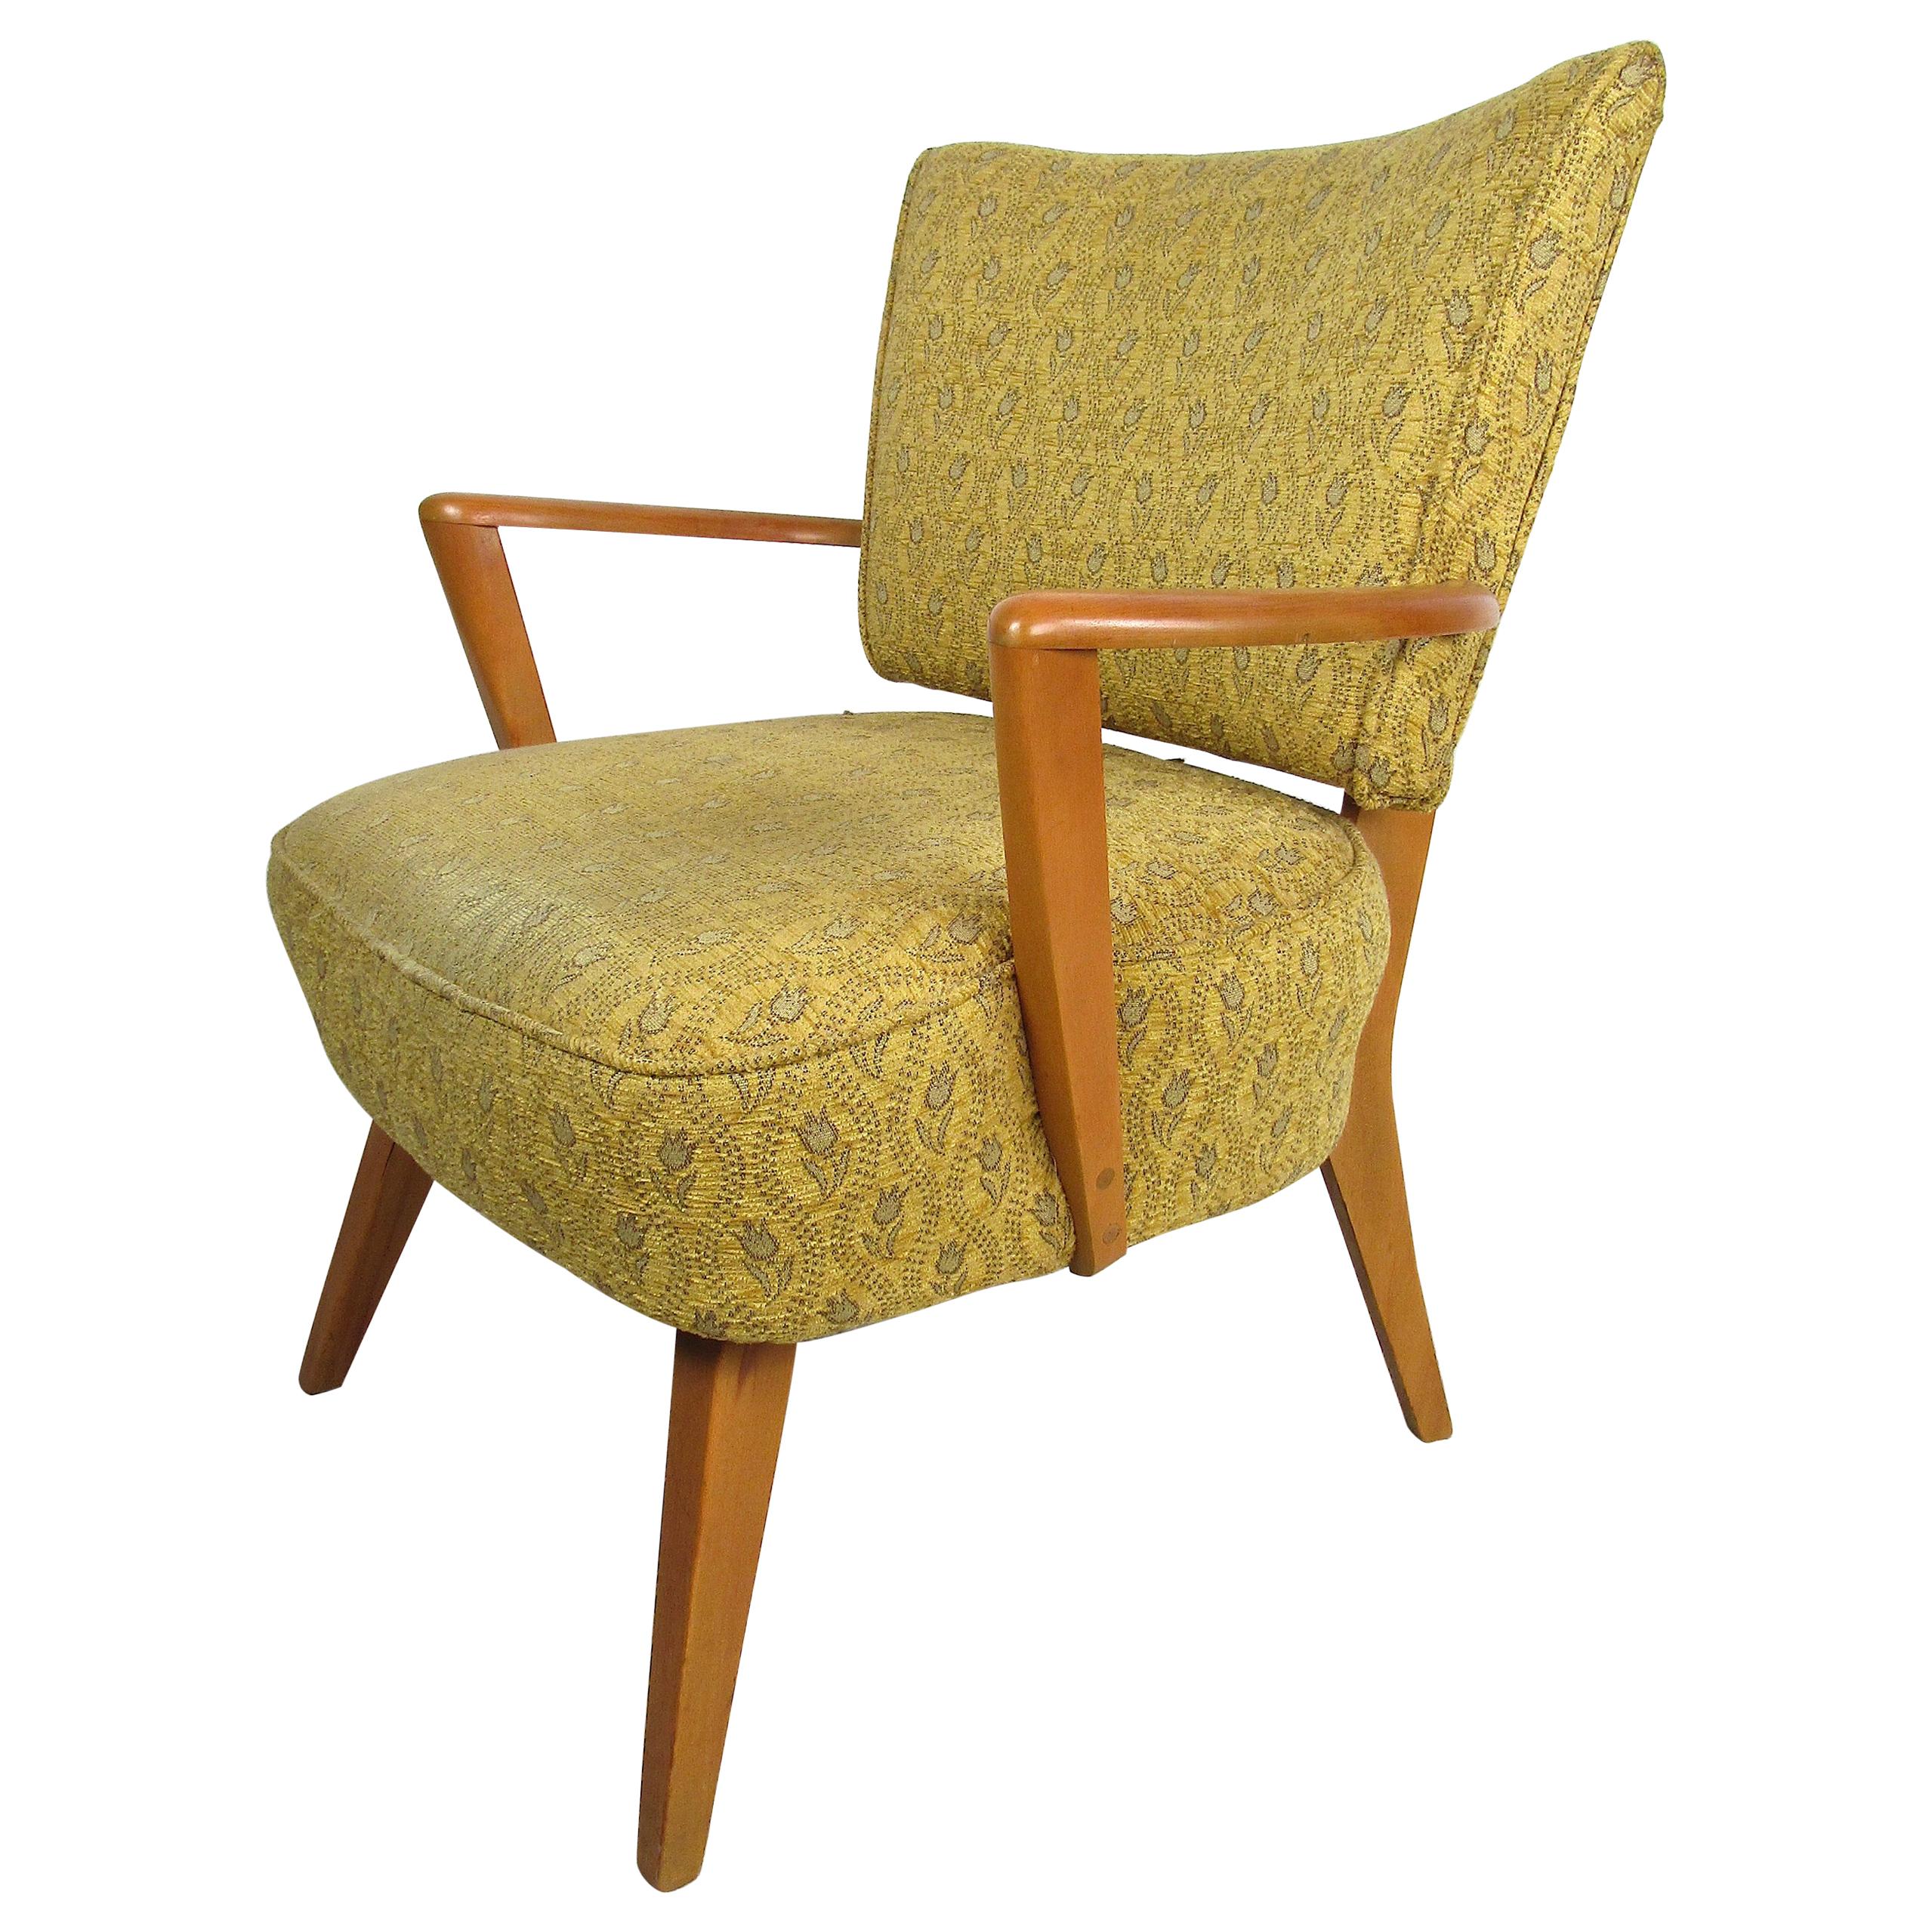 Vintage Armchair with a Floral Pattern Upholstery